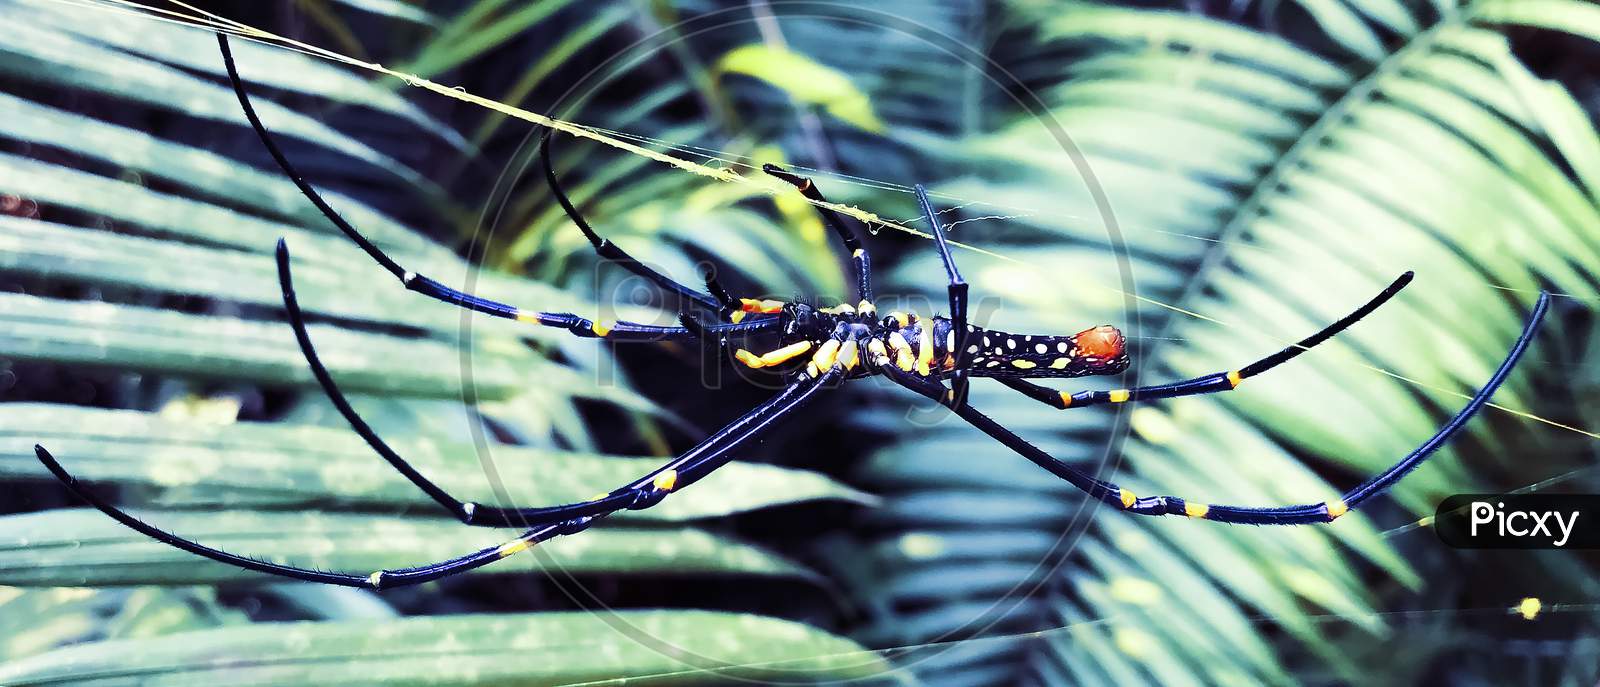 Large Tropical Spider -Nephila. Spider And Spider Web . A Black And Yellow Colour Spider Close Up Shot, Black Spider, Macro Picture,Natural Background, Colorful Big Spiders In Nature, Copy Space .